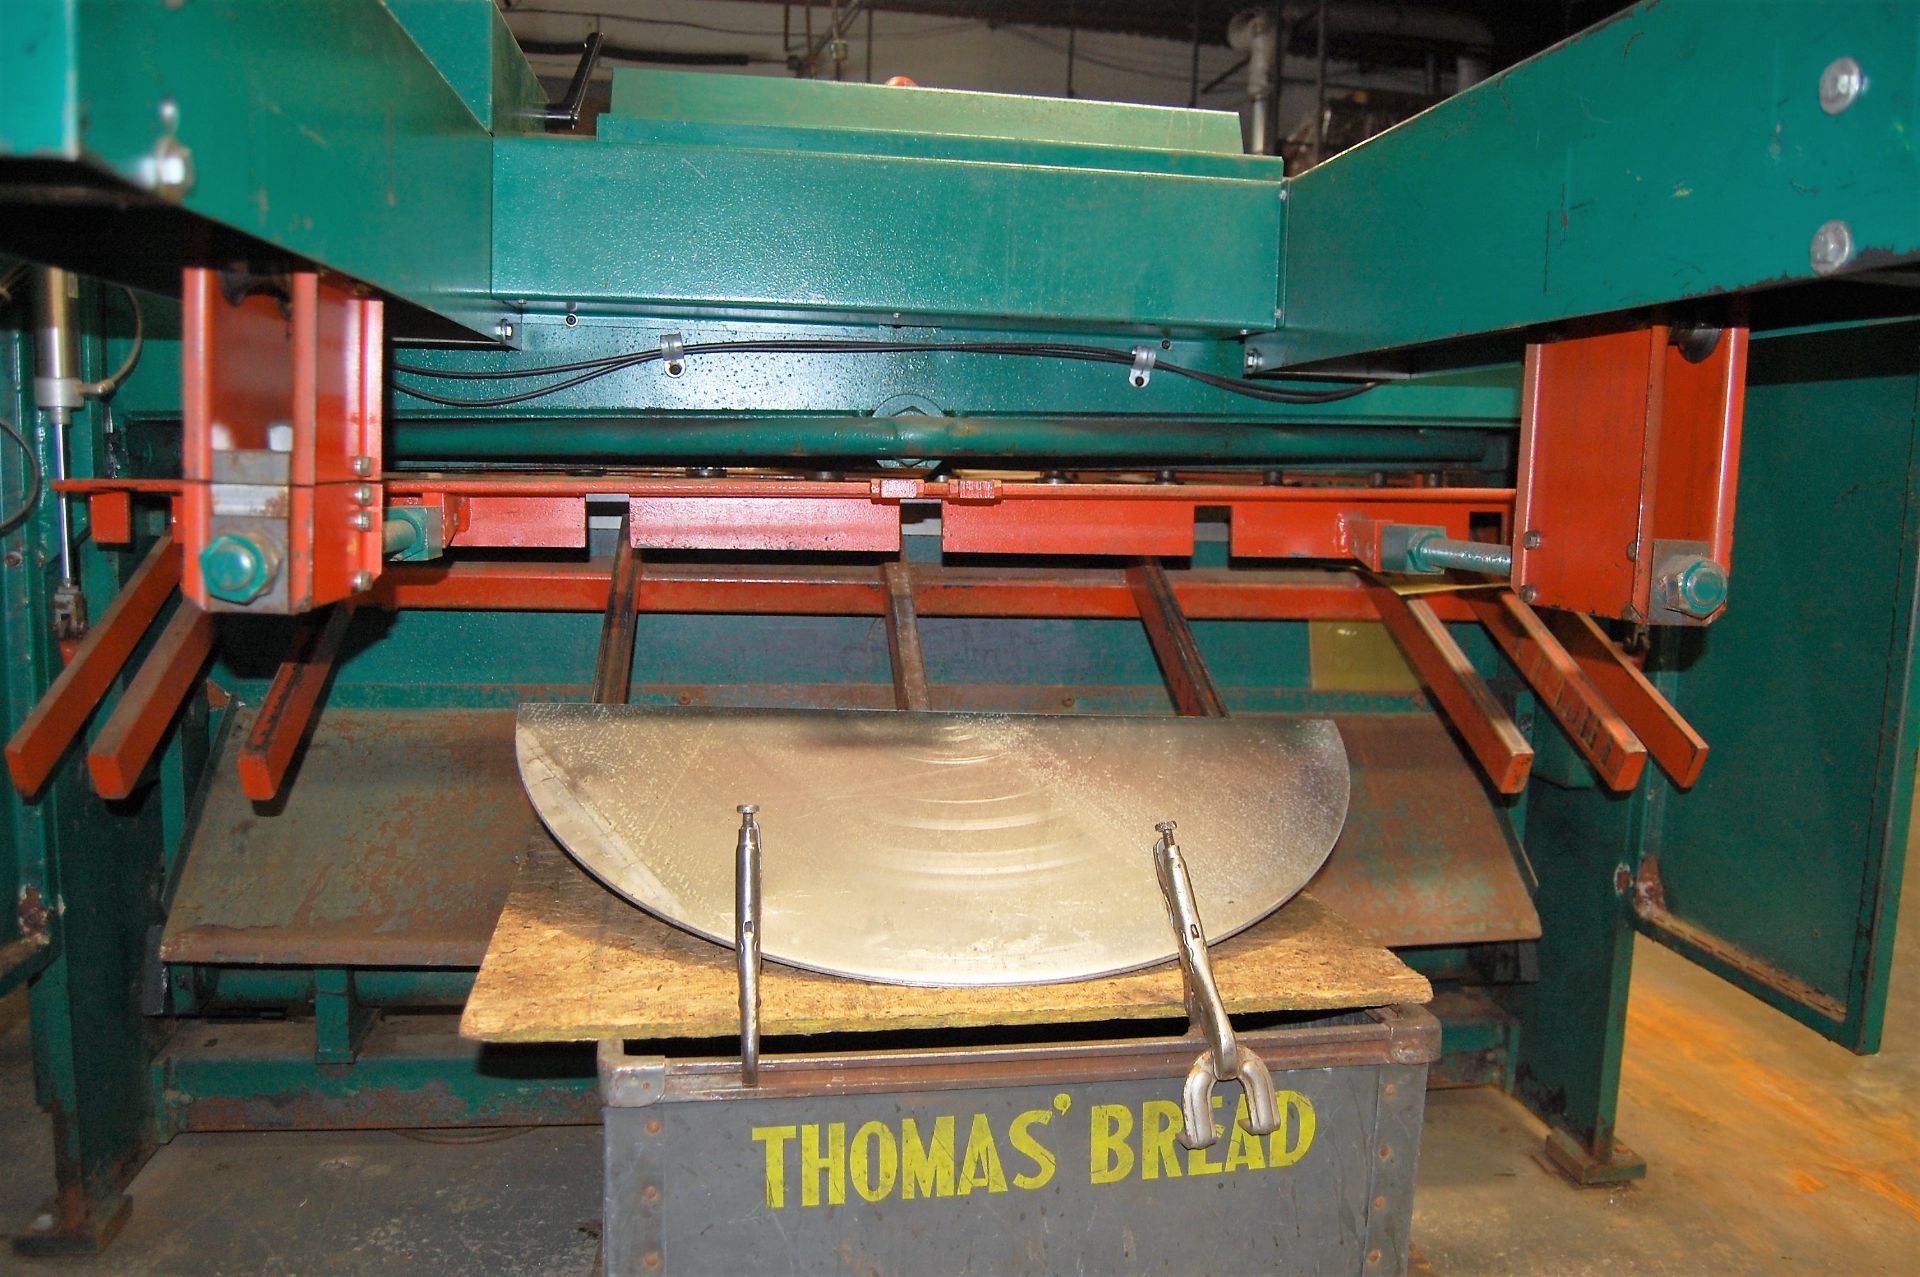 TENNSMITH 5' X 10 GAGE MDL. LM510 POWER SHEAR, WITH 24" FRONT OPERATED MANUAL BACK GAGE, (2) FRONT - Image 4 of 9